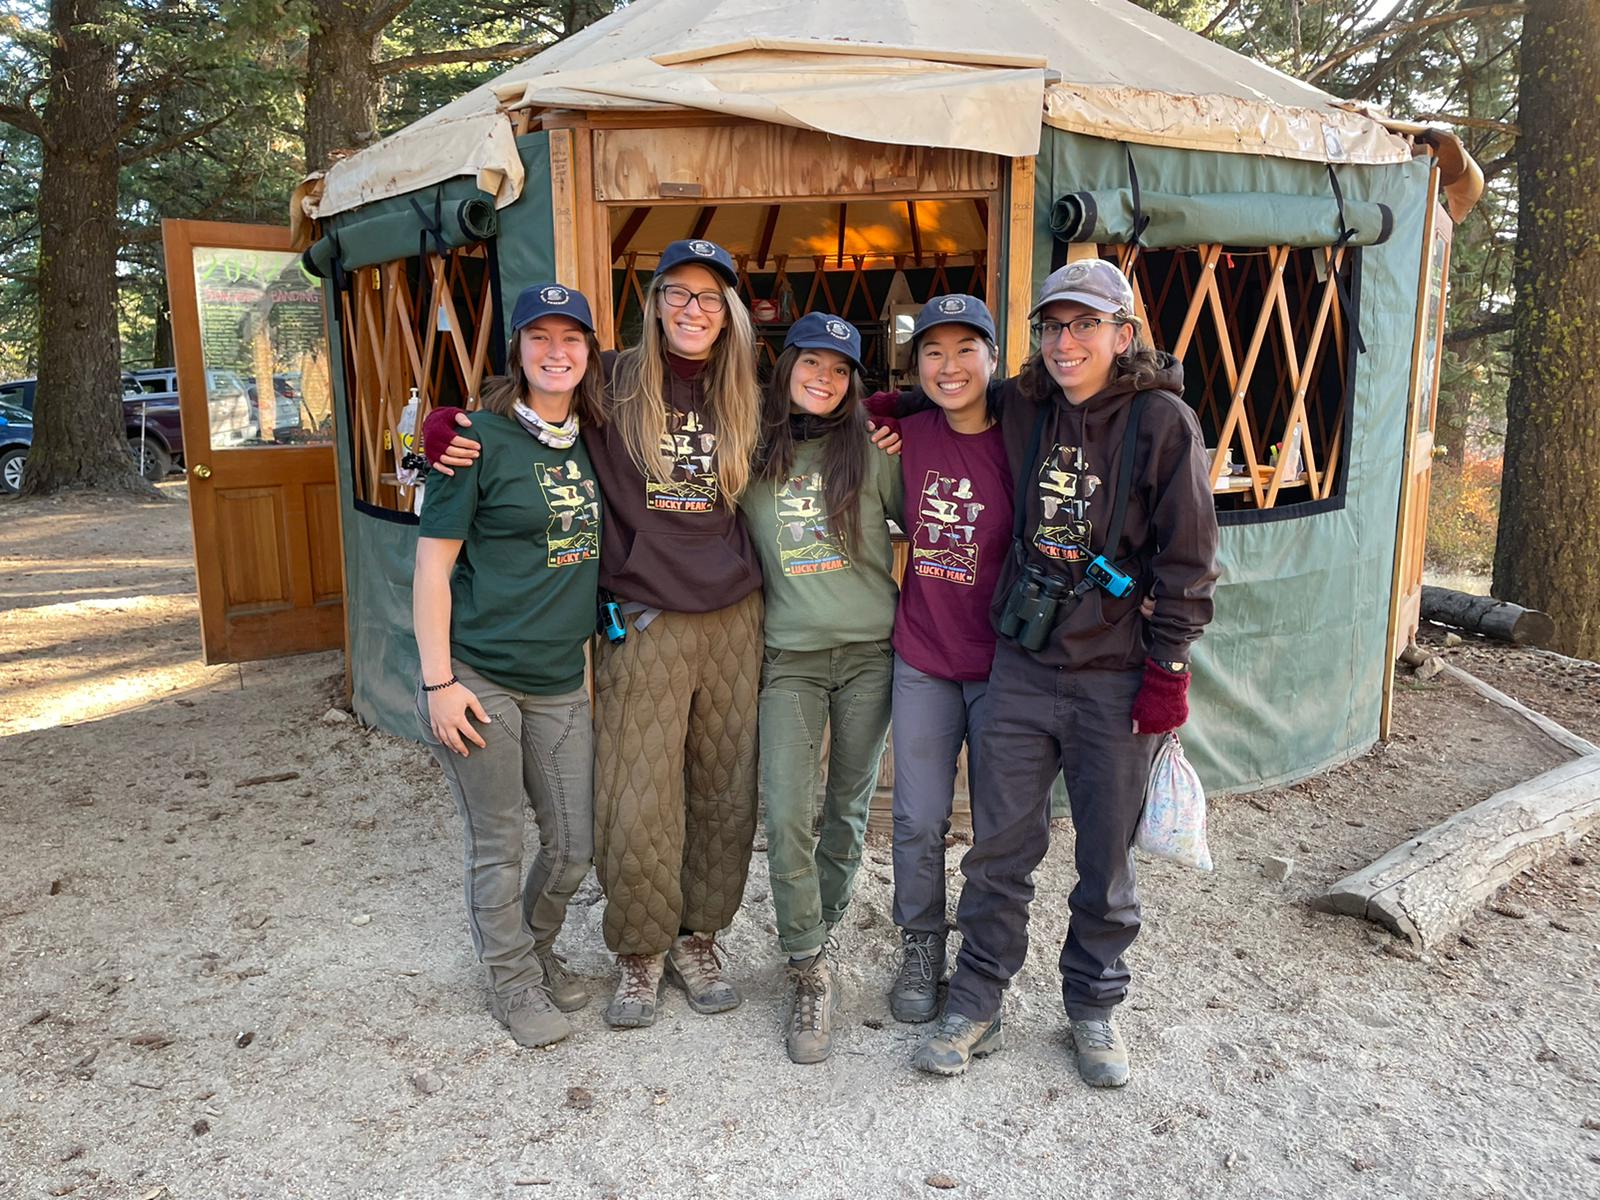 five biologists standing in front of a green yurt outside in the forest. They are smiling cheerfully and hugging each other, wearing matching IBO shirts and hats